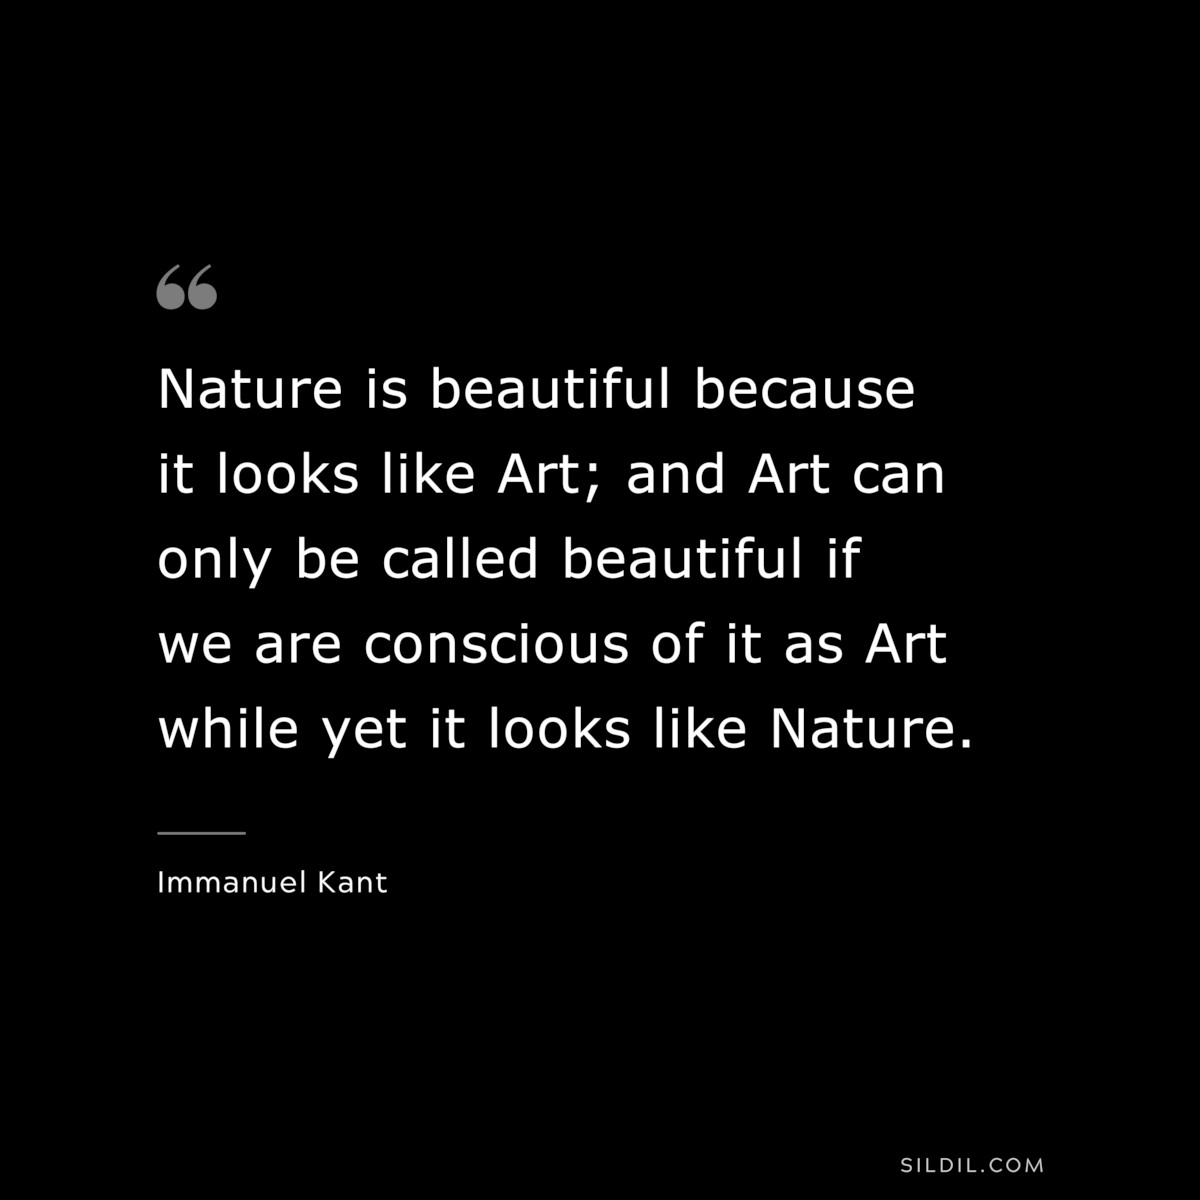 Nature is beautiful because it looks like Art; and Art can only be called beautiful if we are conscious of it as Art while yet it looks like Nature. ― Immanuel Kant